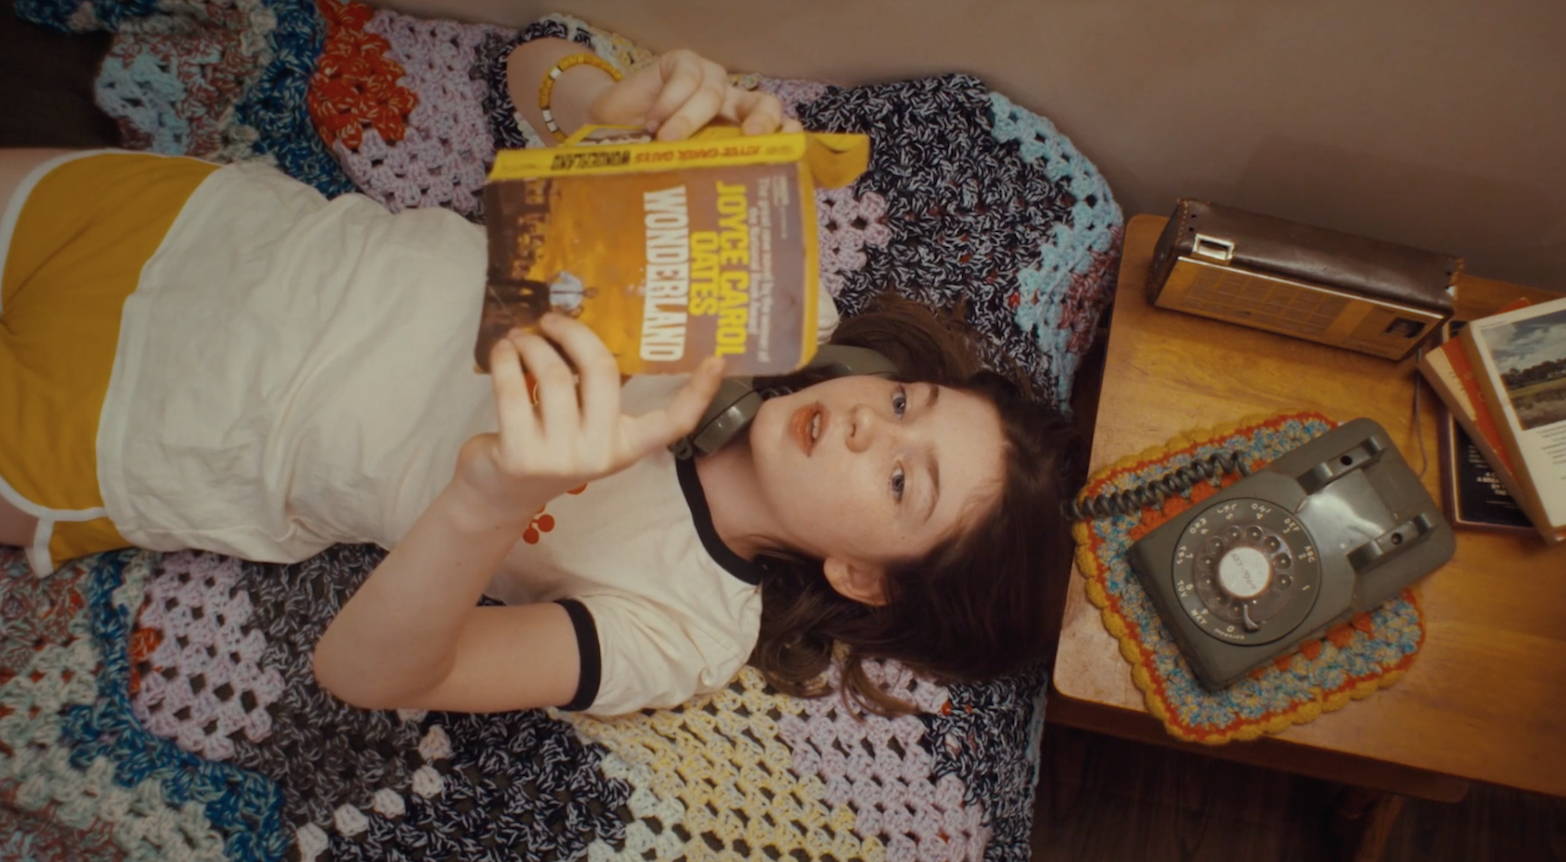 Girl laying on her bed, talking on a 1970s phone, holding a book